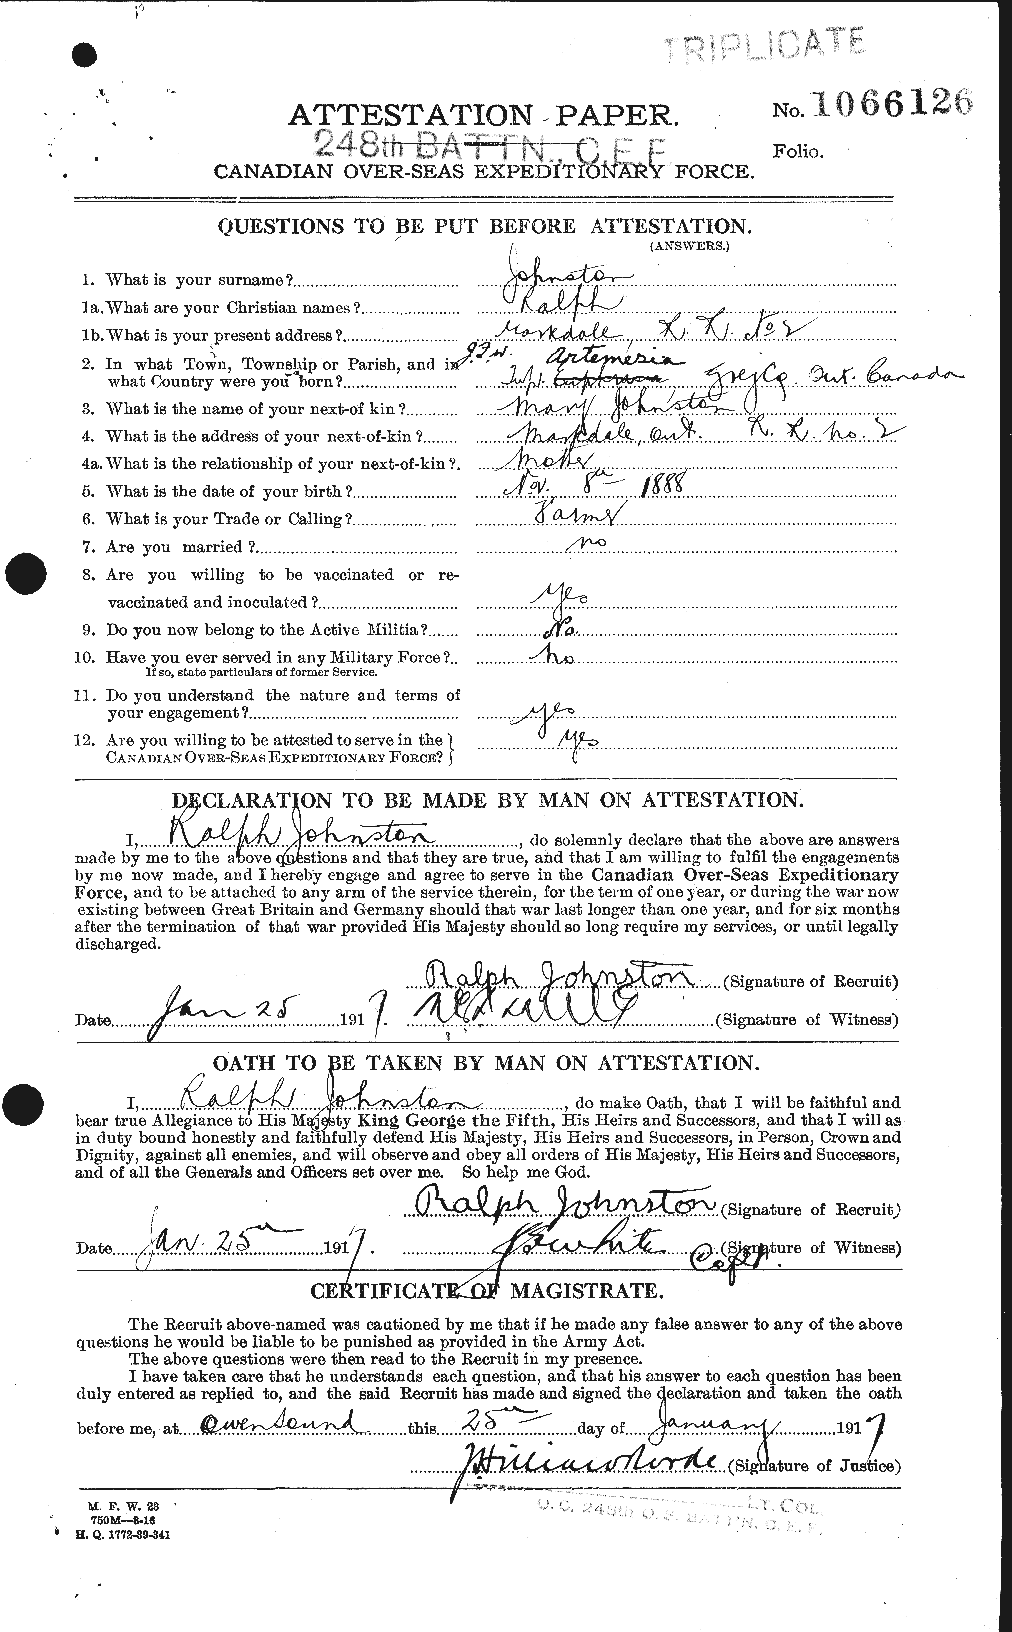 Personnel Records of the First World War - CEF 423049a